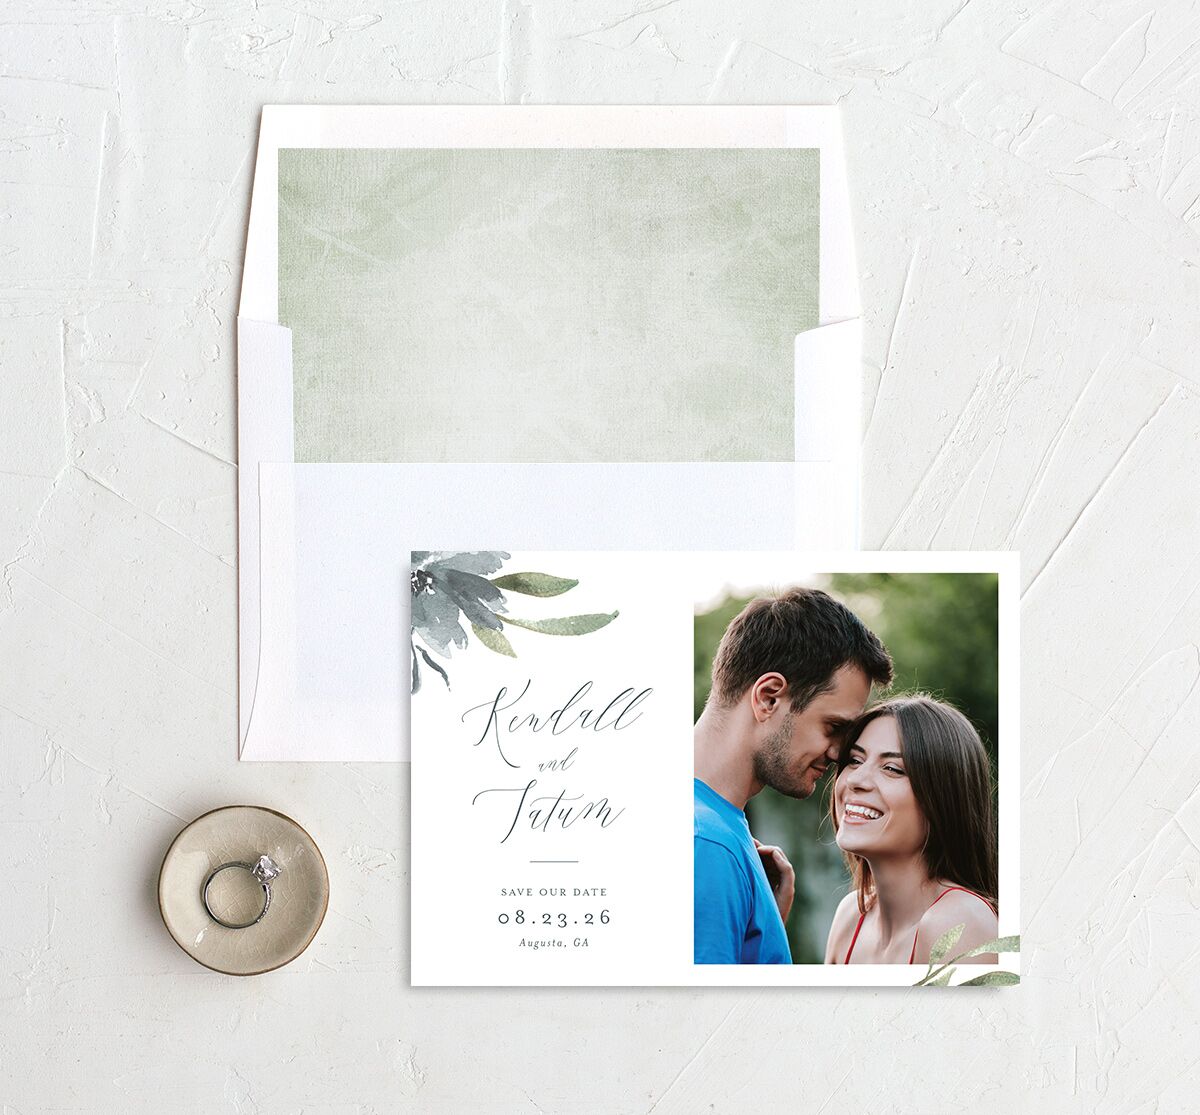 Breezy Botanical Save the Date Cards envelope-and-liner in blue